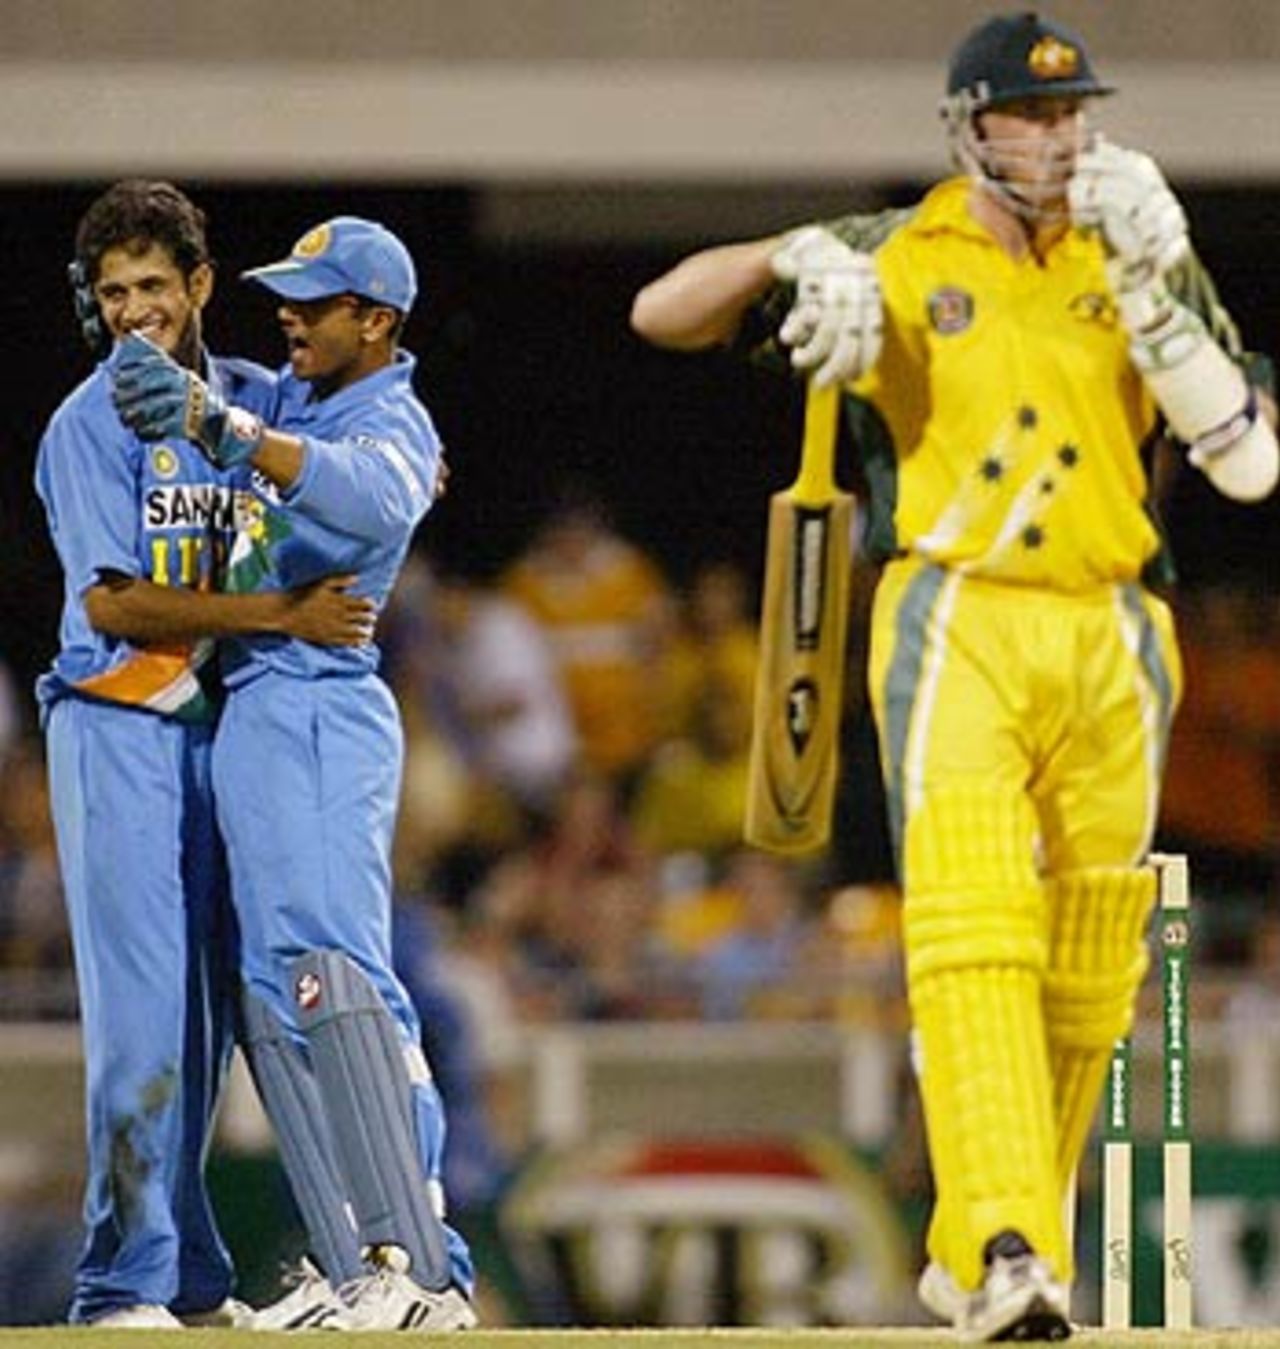 The End. Brad Williams is out as India win by 19 runs, Australia v India, VB Series, Brisbane, 5th ODI, January 18, 2004